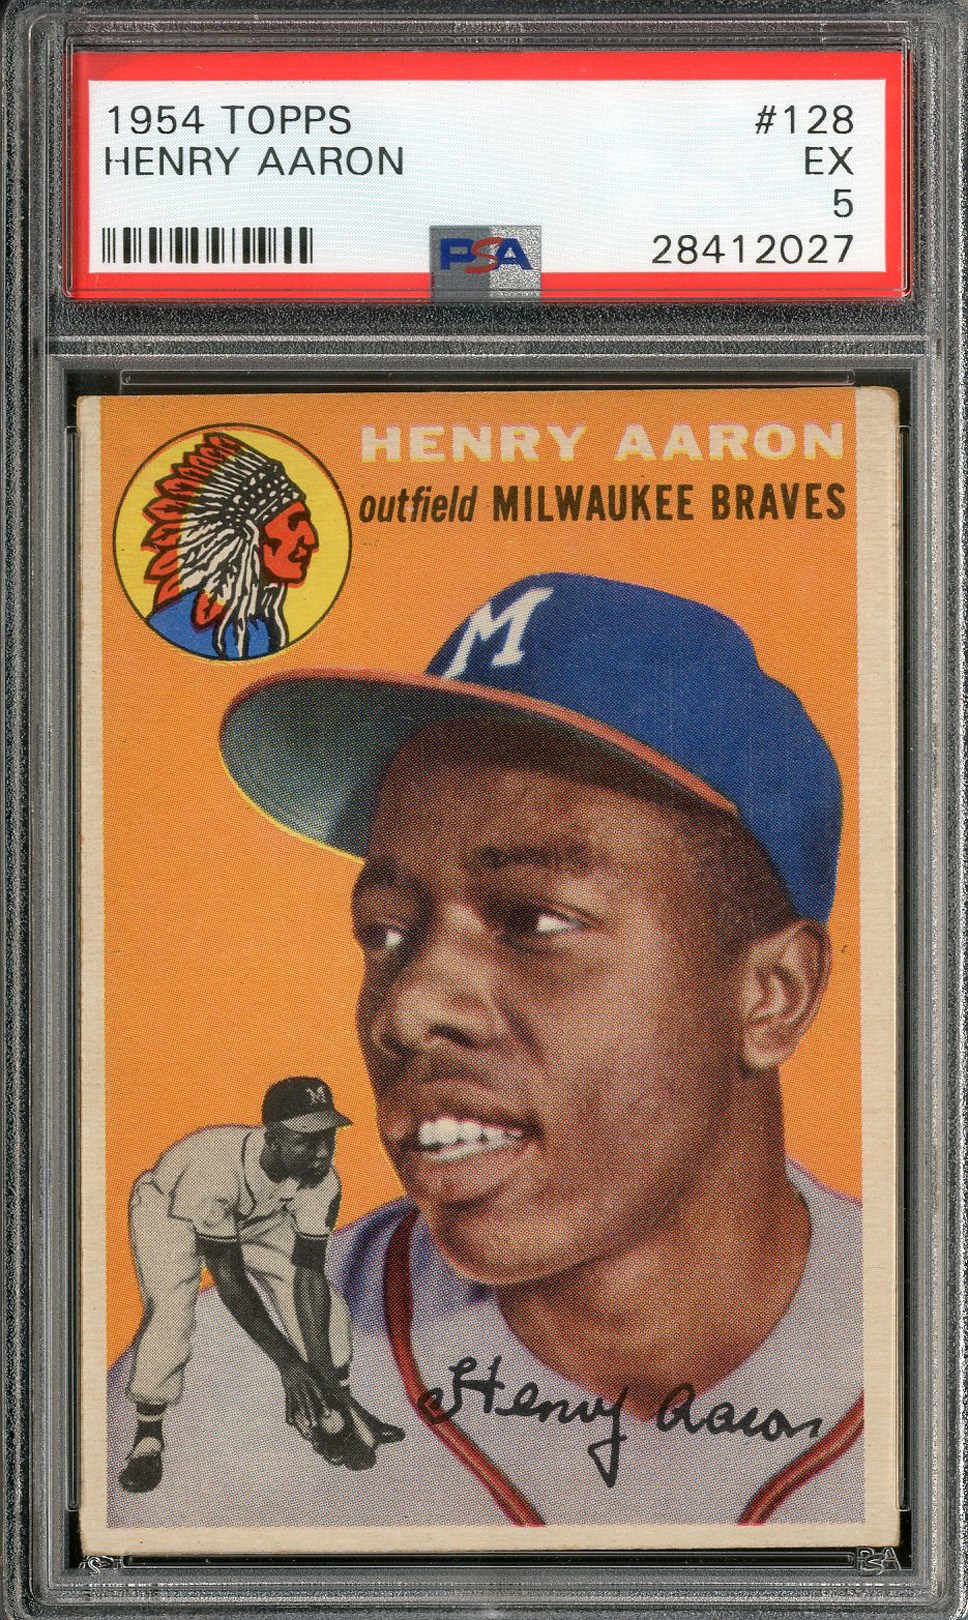 Baseball and Trading Cards - 1954 Topps #128 Hank Aaron - PSA EX 5